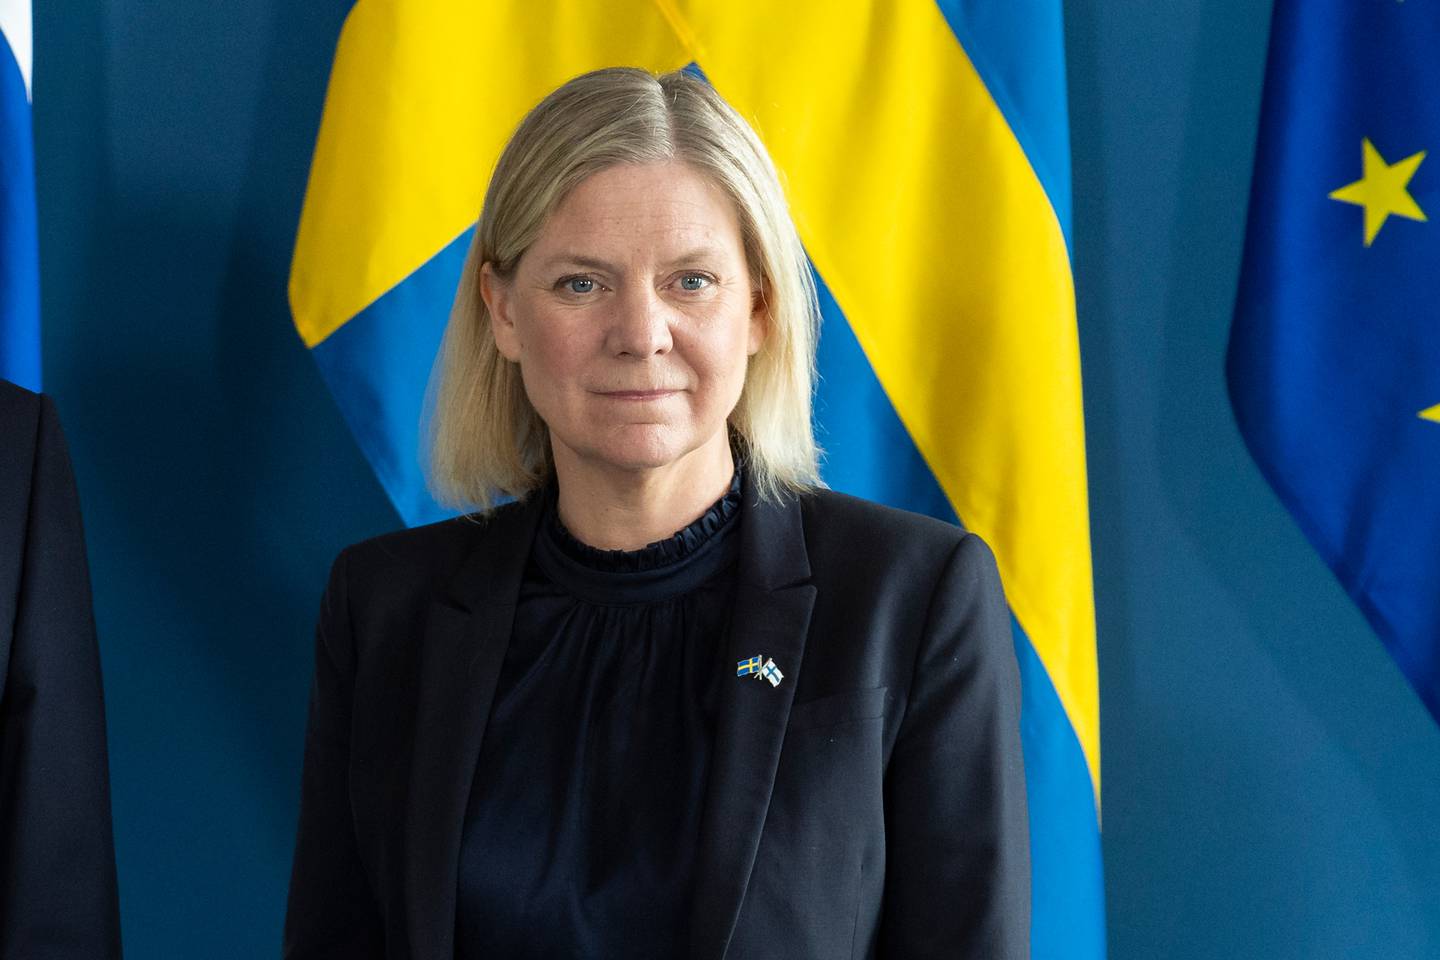 Swedish Prime Minister Magdalena Andersson has announced Sweden's decision to apply for Nato membership. Photo / Getty